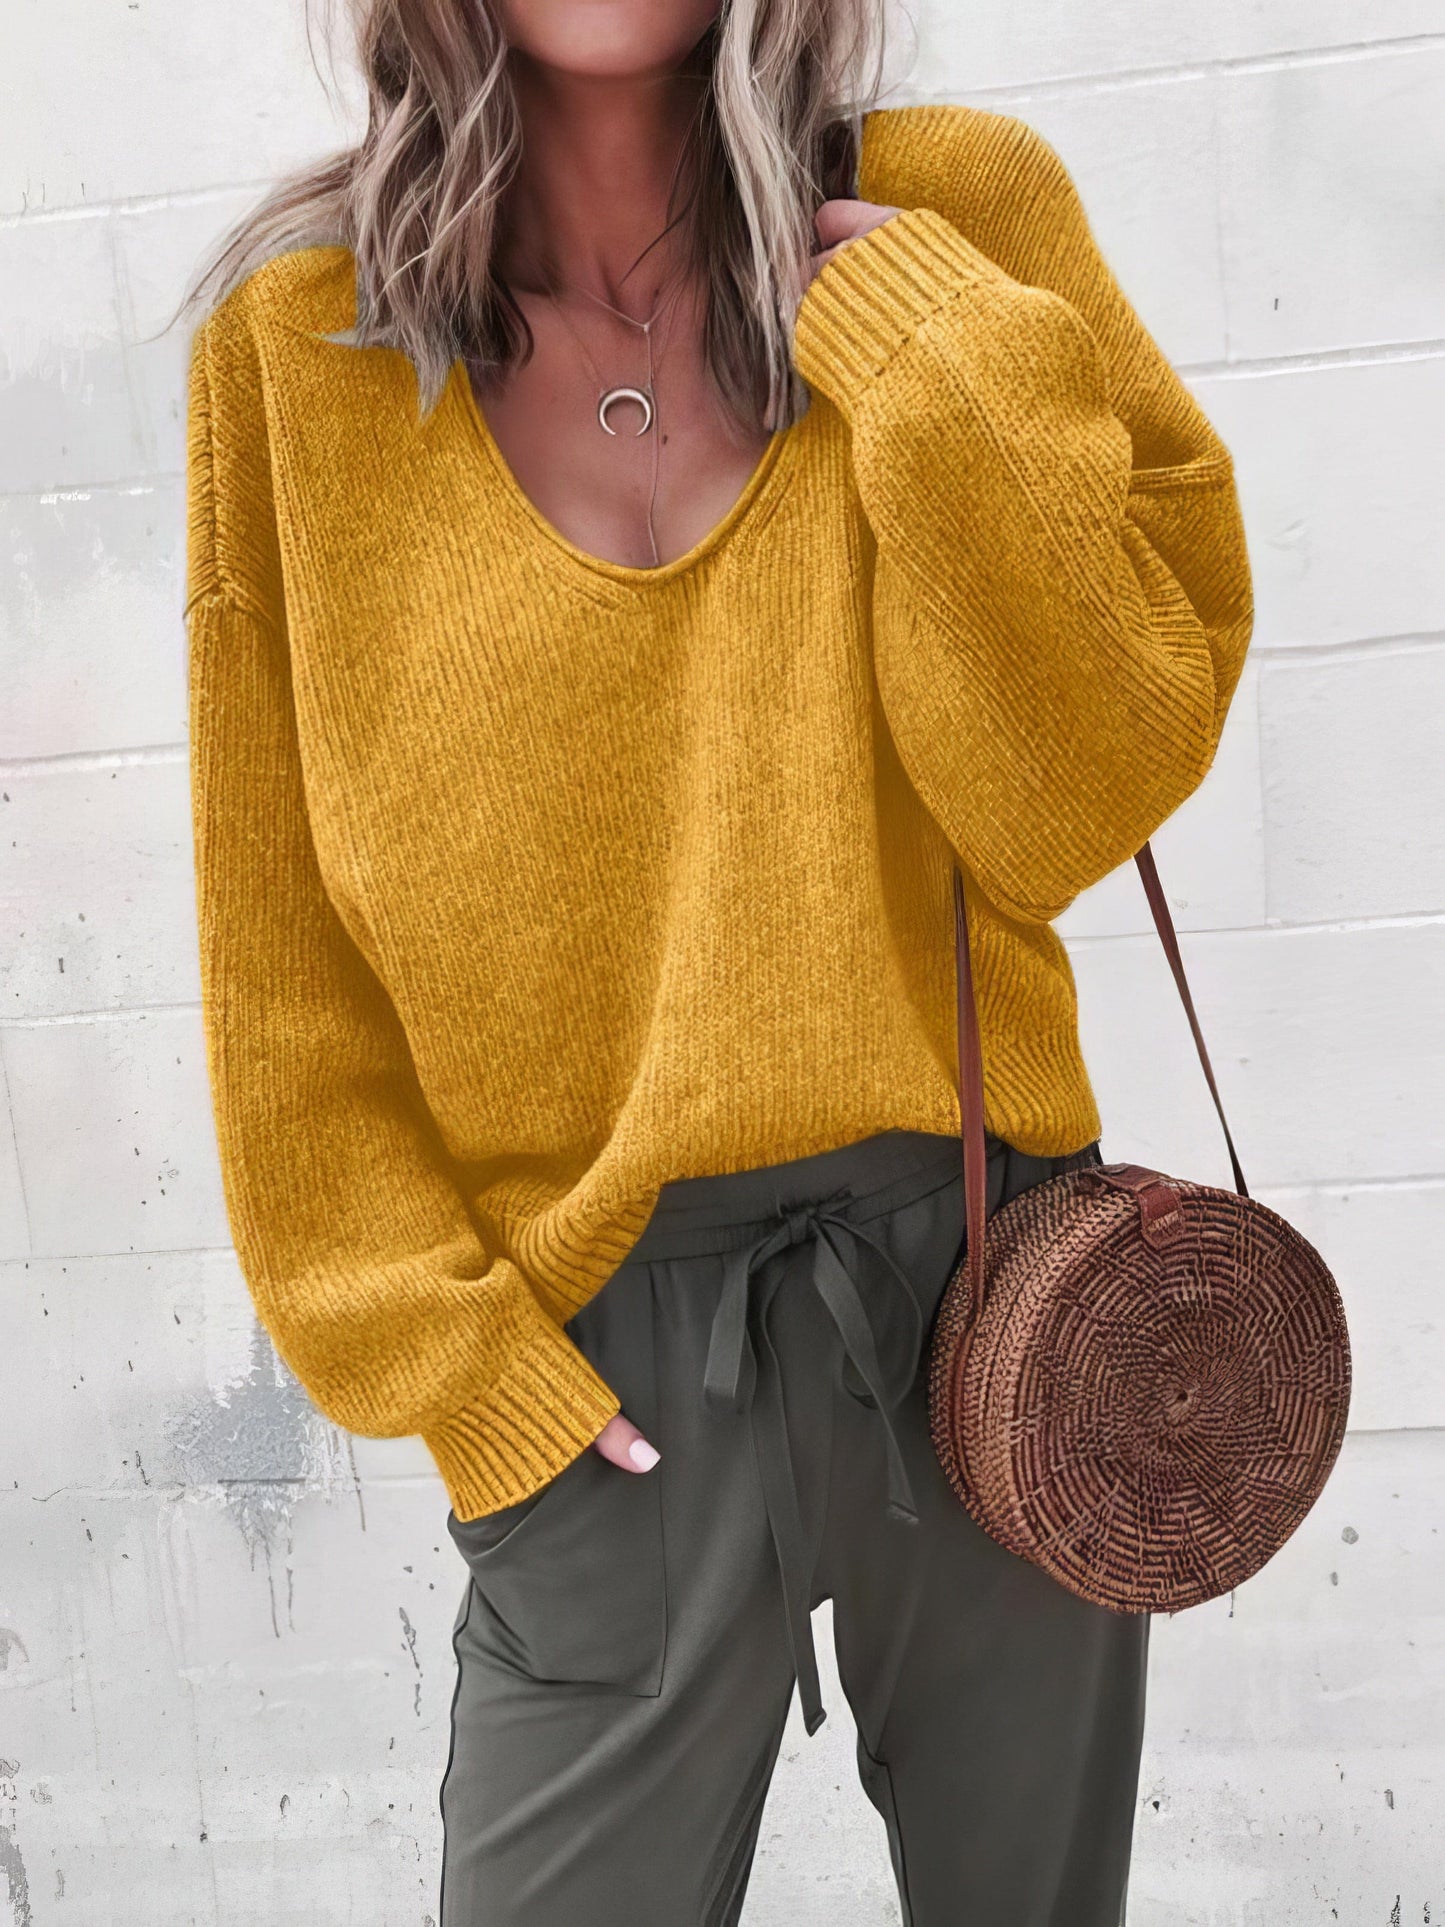 V-Neck Long Sleeve Solid Loose Knit Sweater SWE2109181185YELS Yellow / 2 (S)